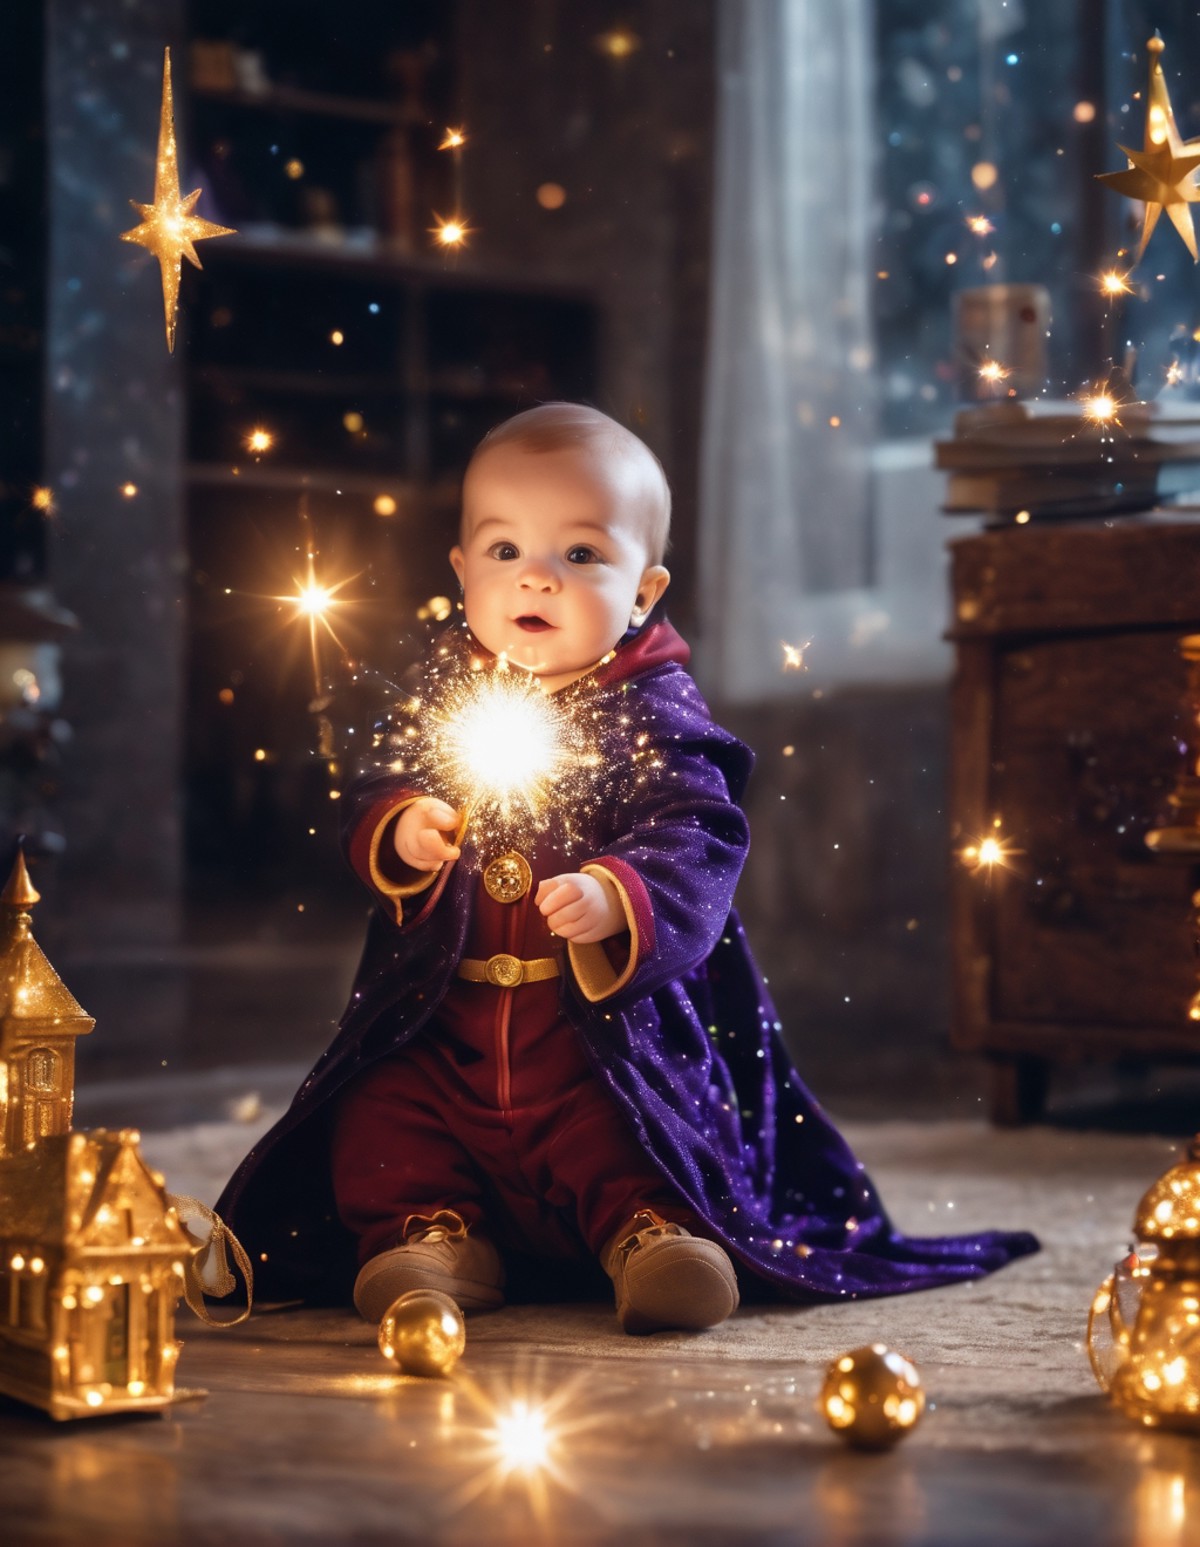 A baby wizard is discovering its abilities. magic is in the air with sparkles and levitating toys around the baby wizard. ...